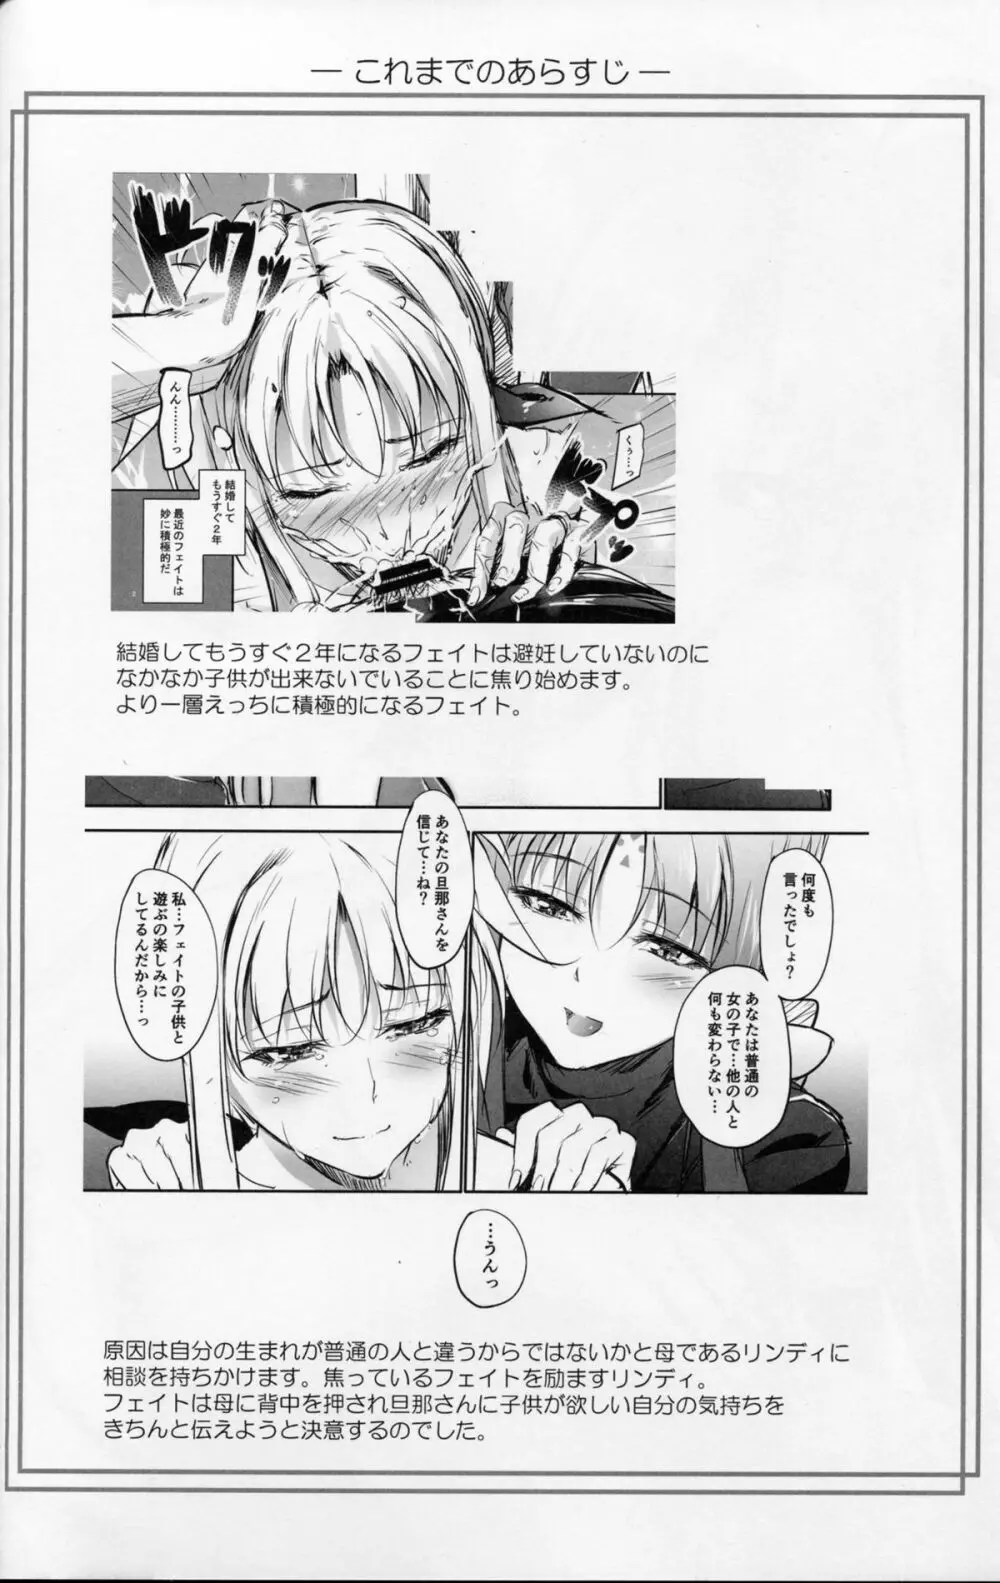 Home Sweet Home ～フェイト編 6～ - page3